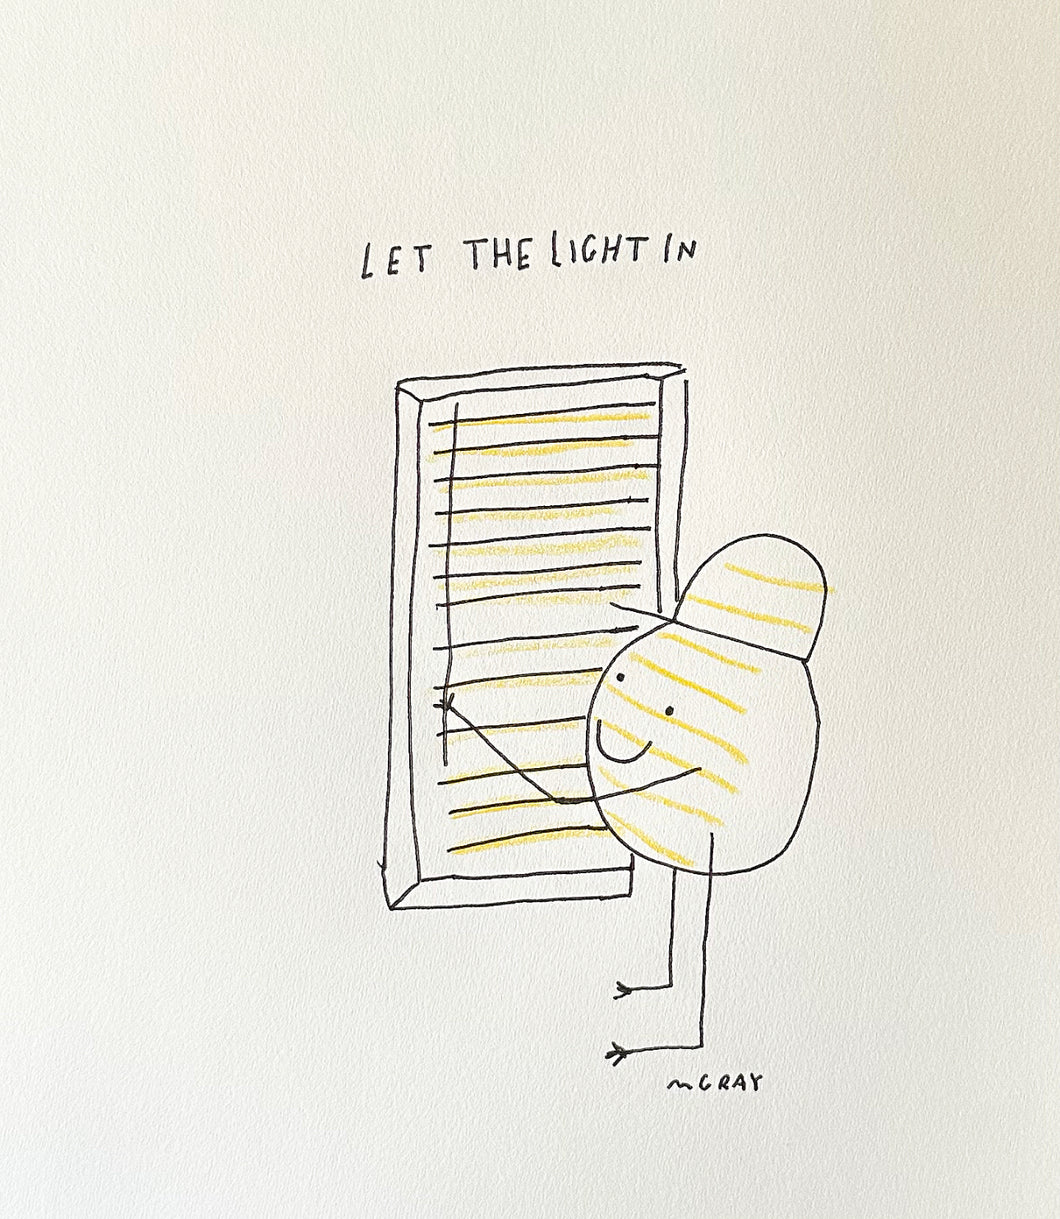 Let the light in